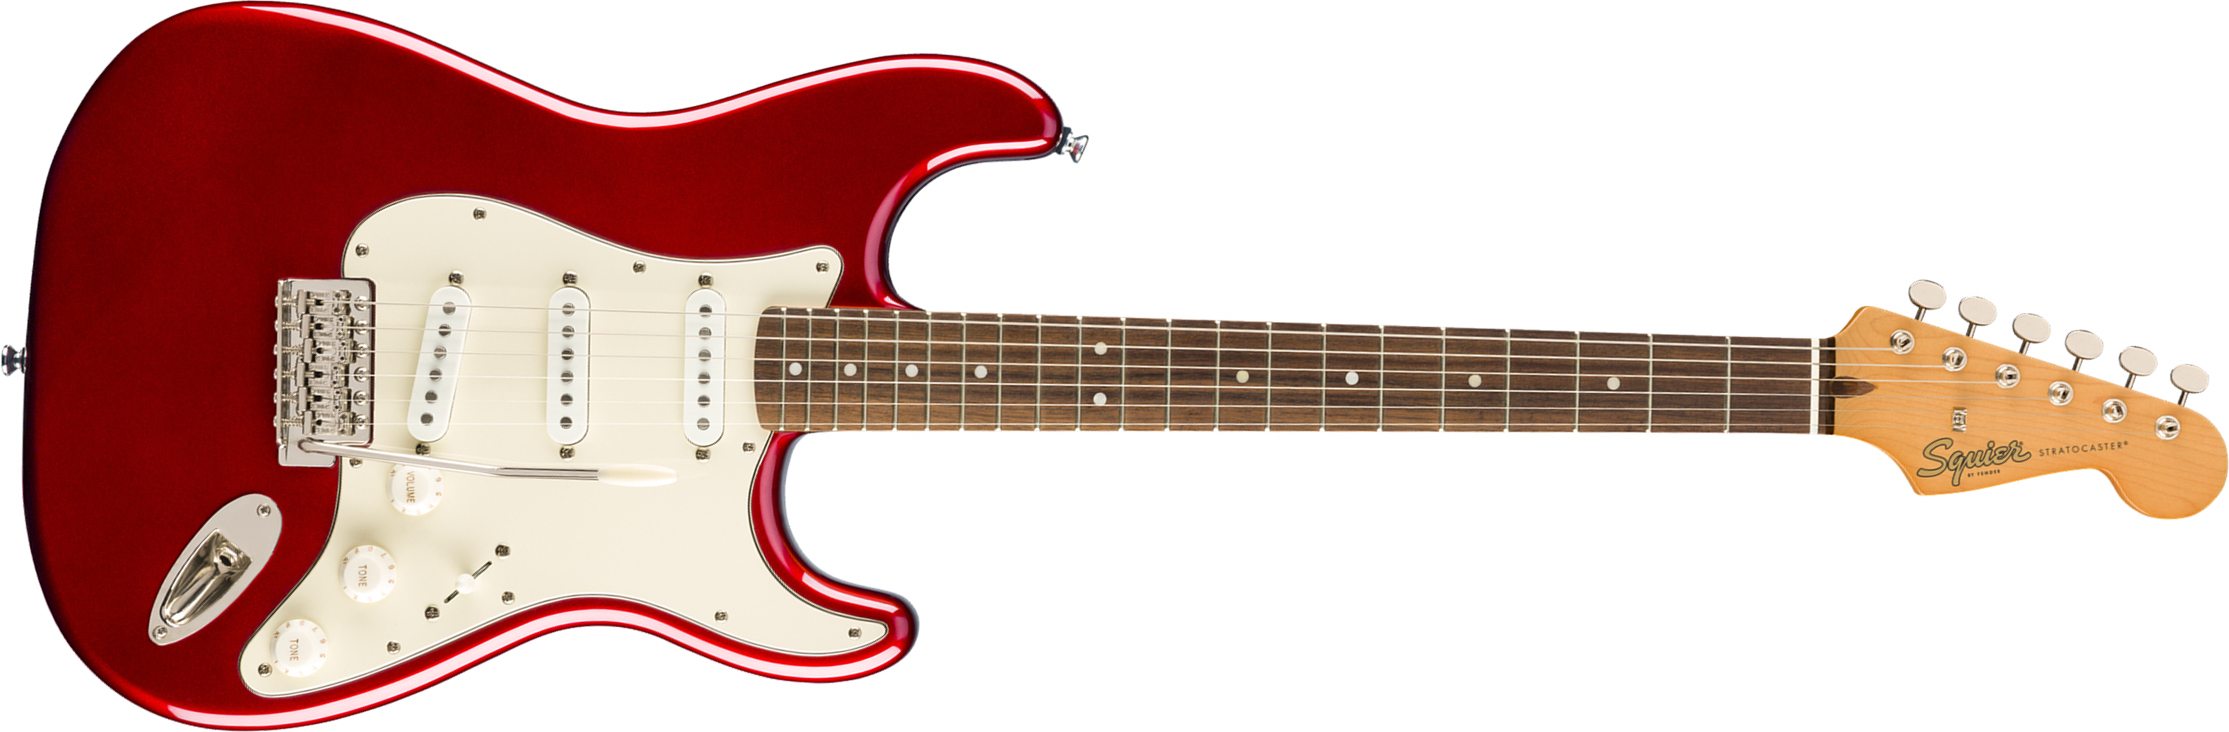 Squier Strat '60s Classic Vibe 2019 Lau 2019 - Candy Apple Red - Str shape electric guitar - Main picture